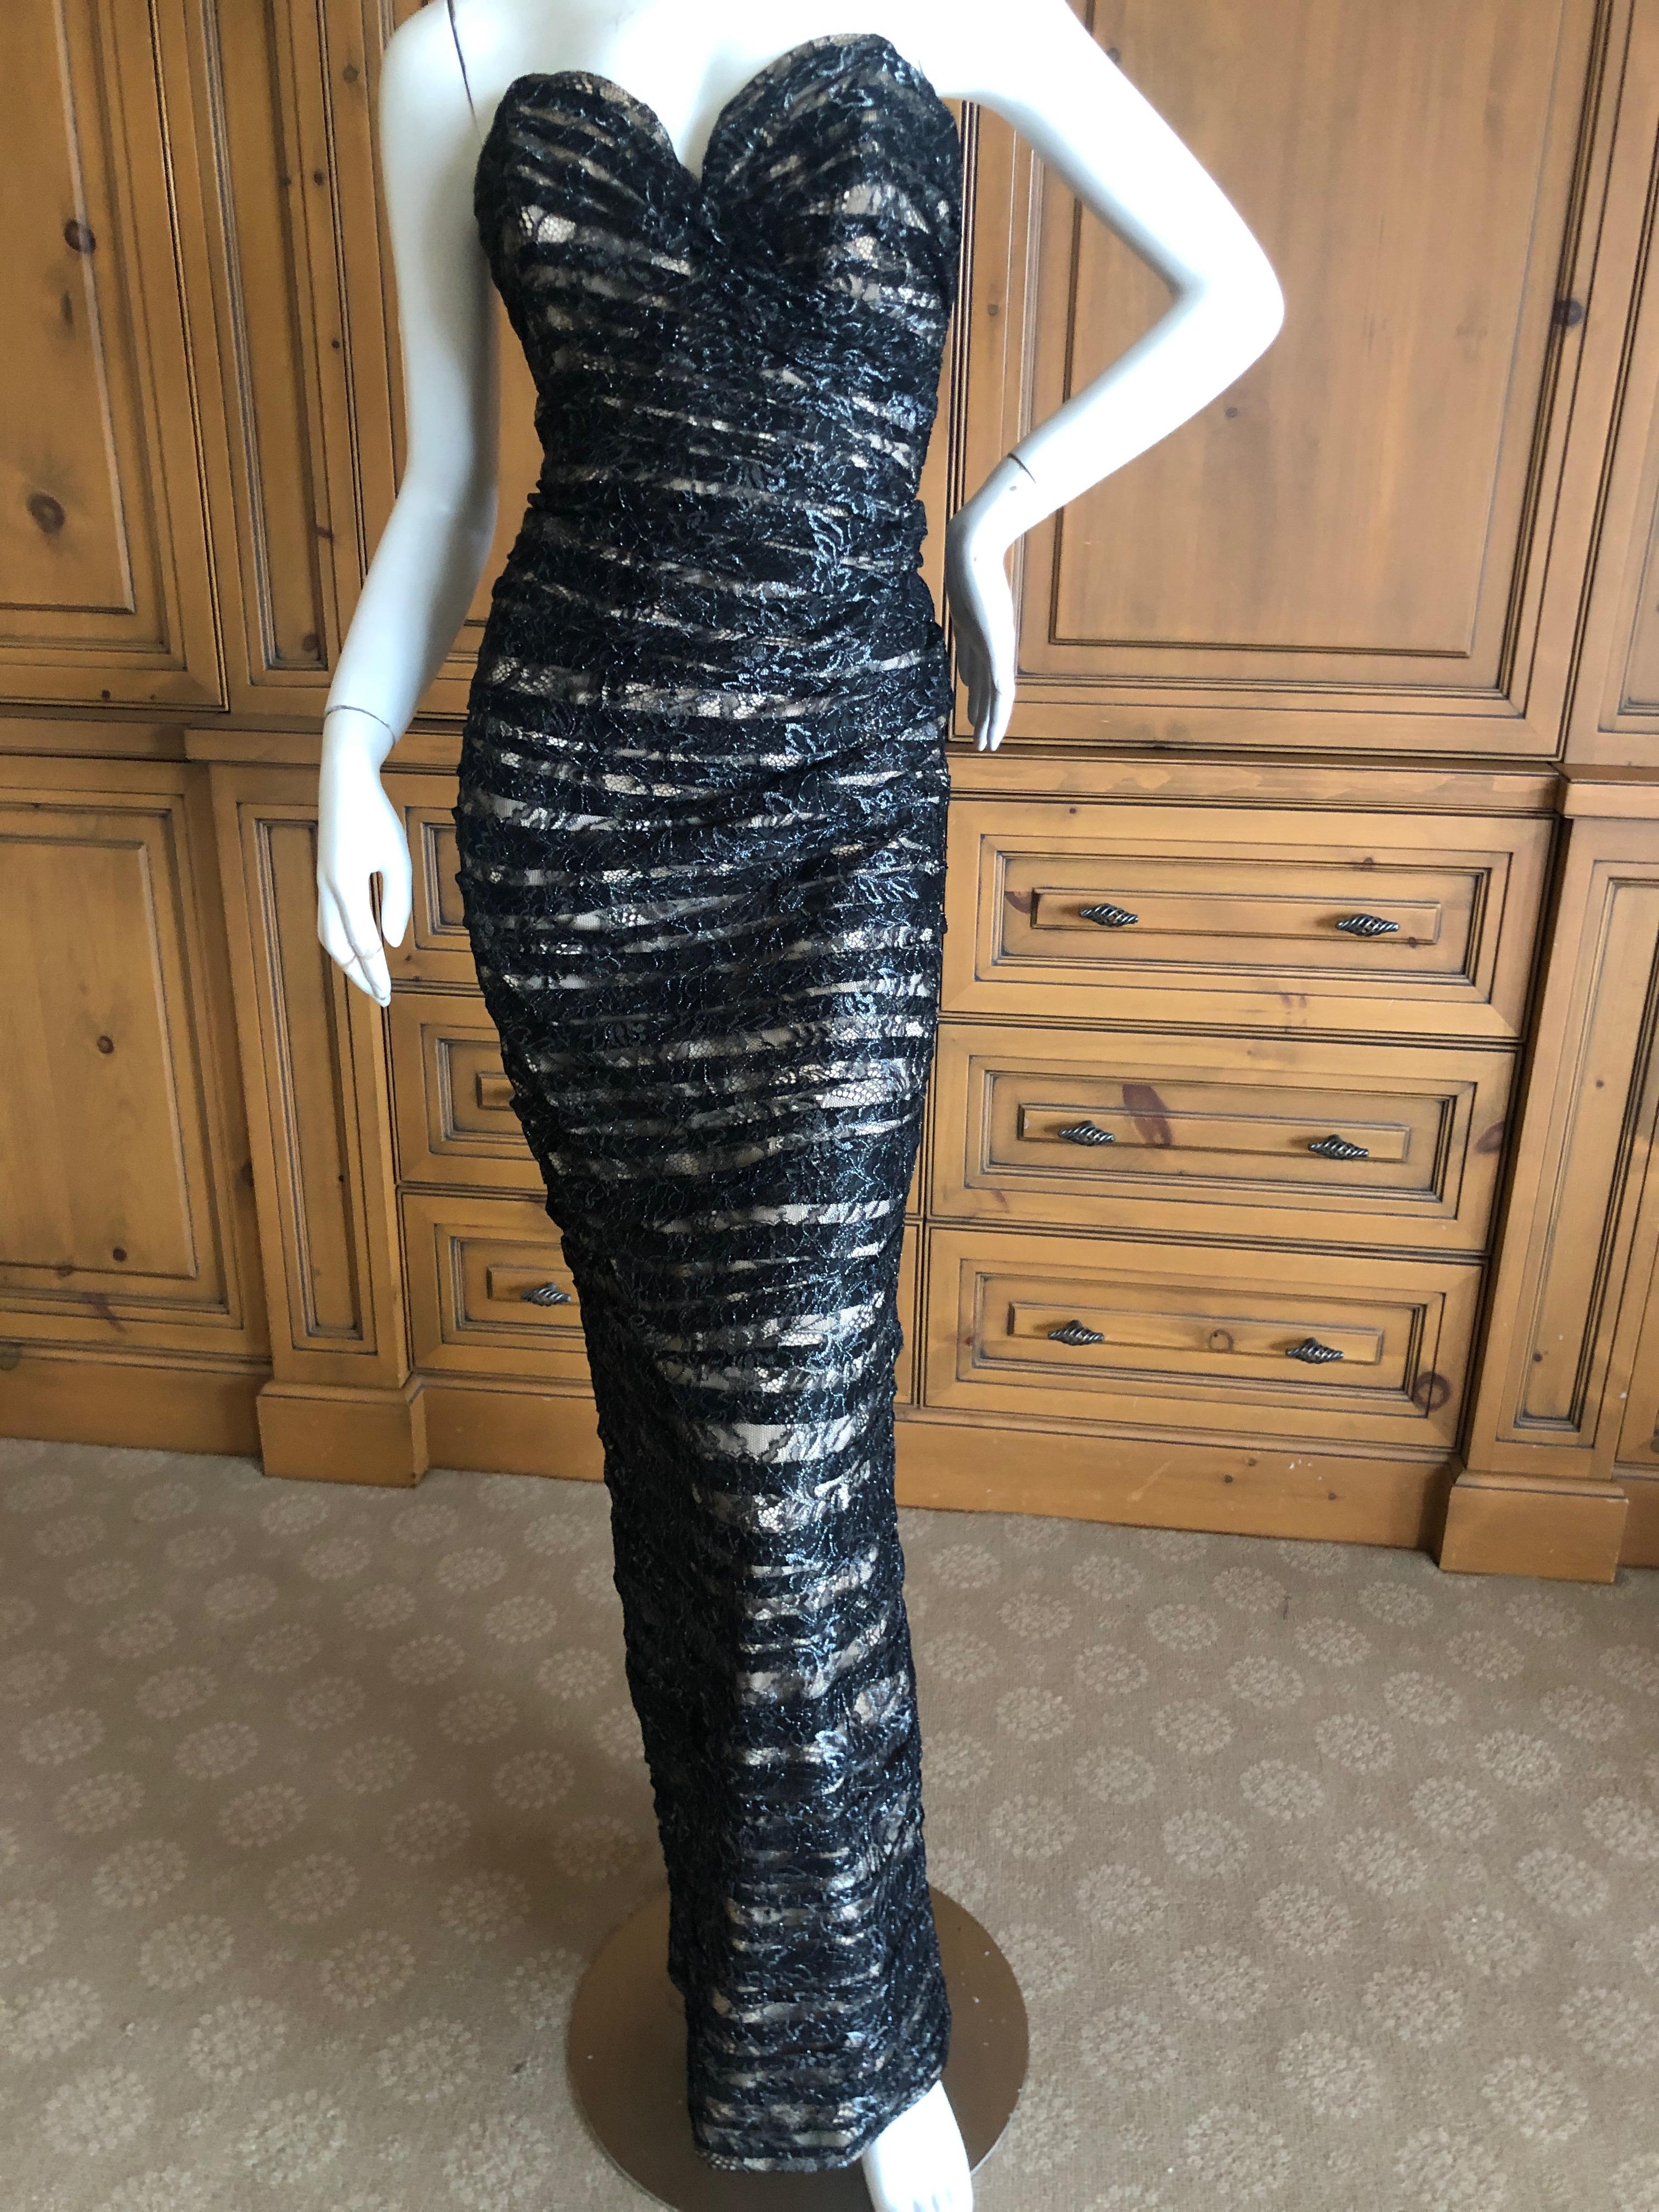 Vicky Tiel Paris Vintage Silver Accented Black Lace Strapless Siren Dress with Inner Corset.
Size 6
Bust 36